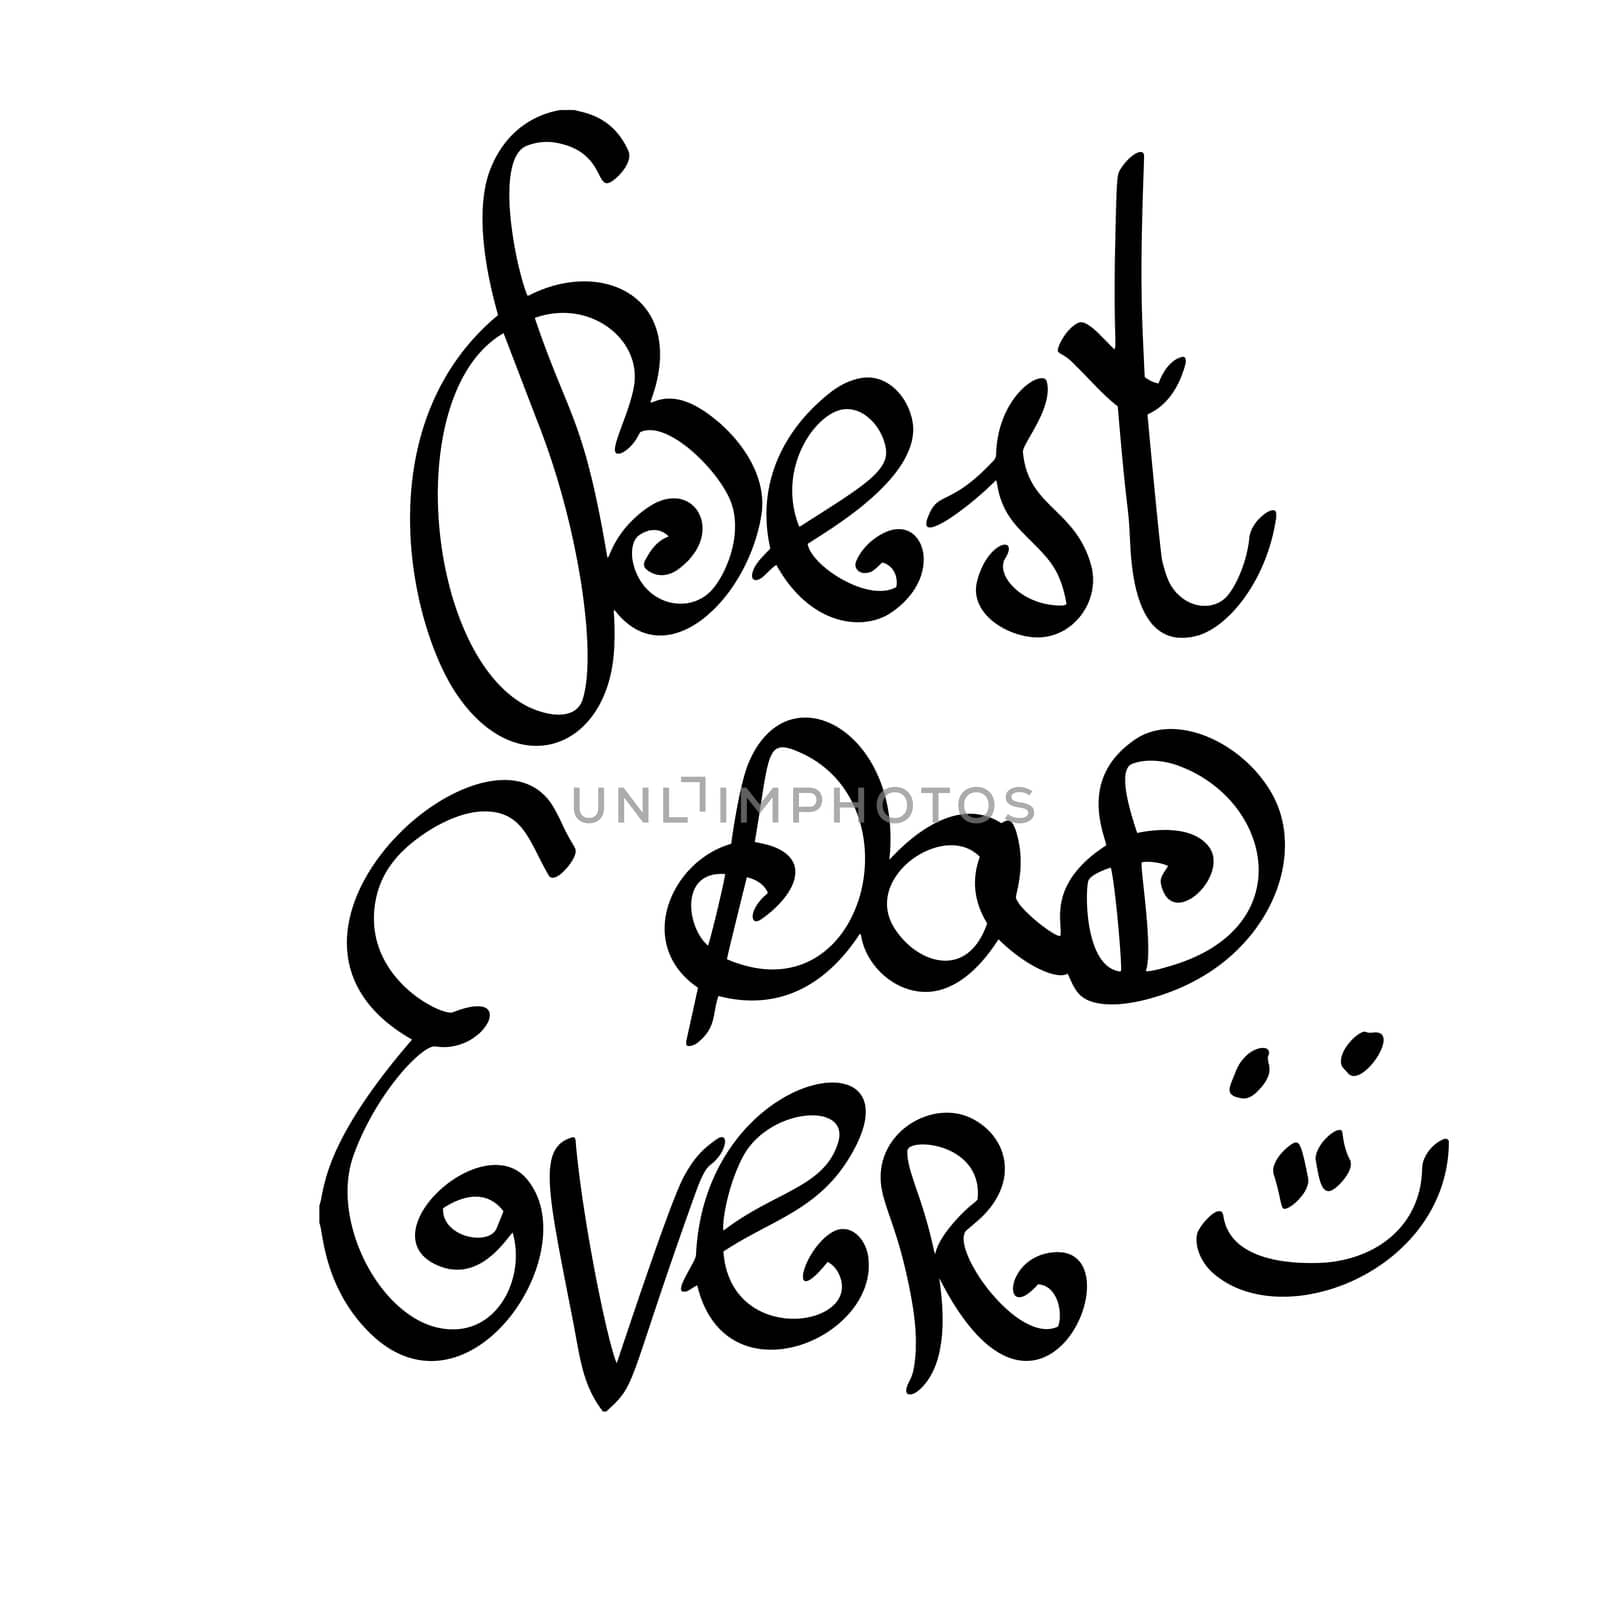 Best Dad Ever. hand-written lettering, t-shirt print design, typographic composition isolated on white background. by skrotov